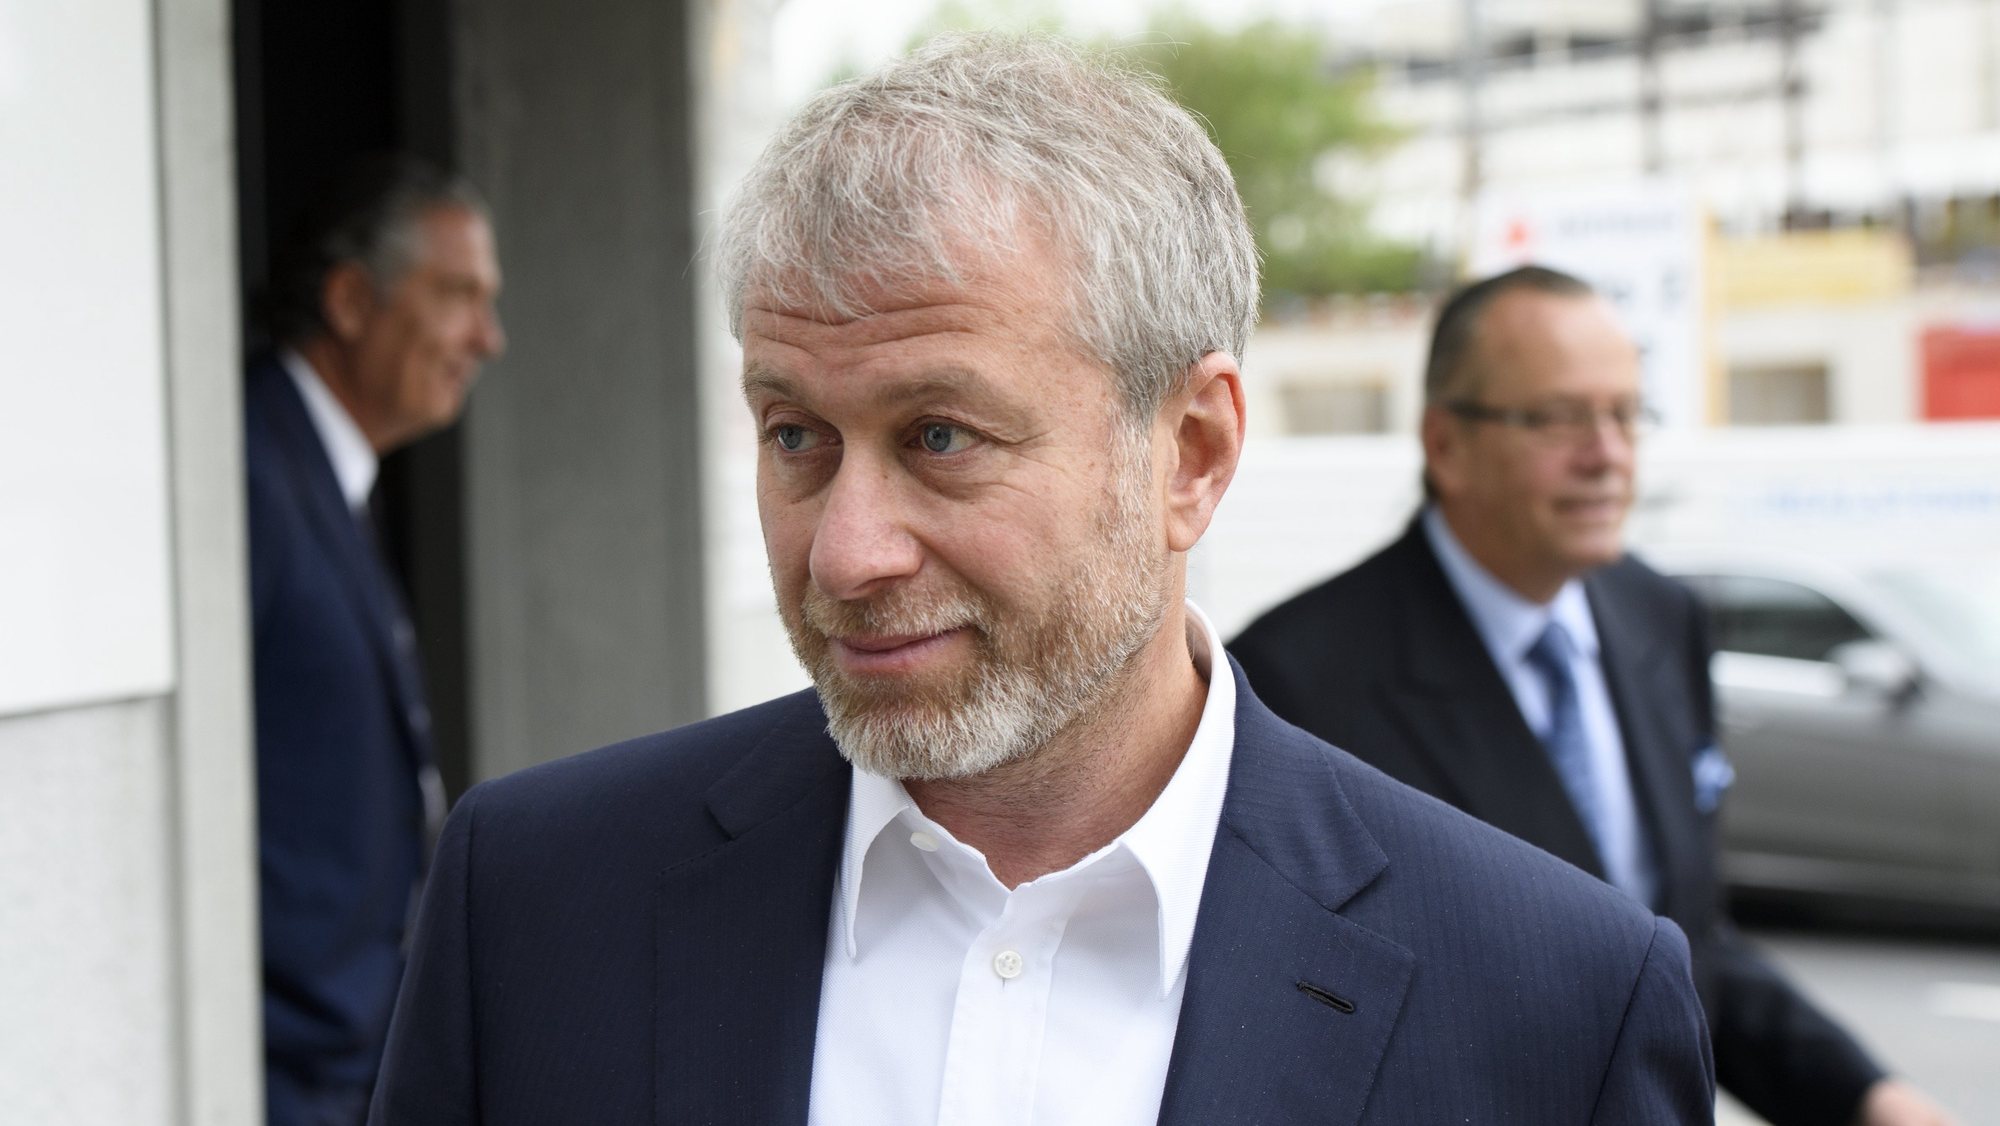 epa06706105 The Russian oligarch Roman Abramovich leaves the opening of the civil proceedings brought by the European Bank for Reconstruction and Development (EBRD) against Abramovich, Shvidler and the Russian giant Gazprom, at the District Court of Sarine in Friburg, Switzerland, 02 May 2018. The EBRD is claiming 46 million francs plus interest since 2005. The shareholders and Gazprom contest the claim for the debt.  EPA/ANTHONY ANEX